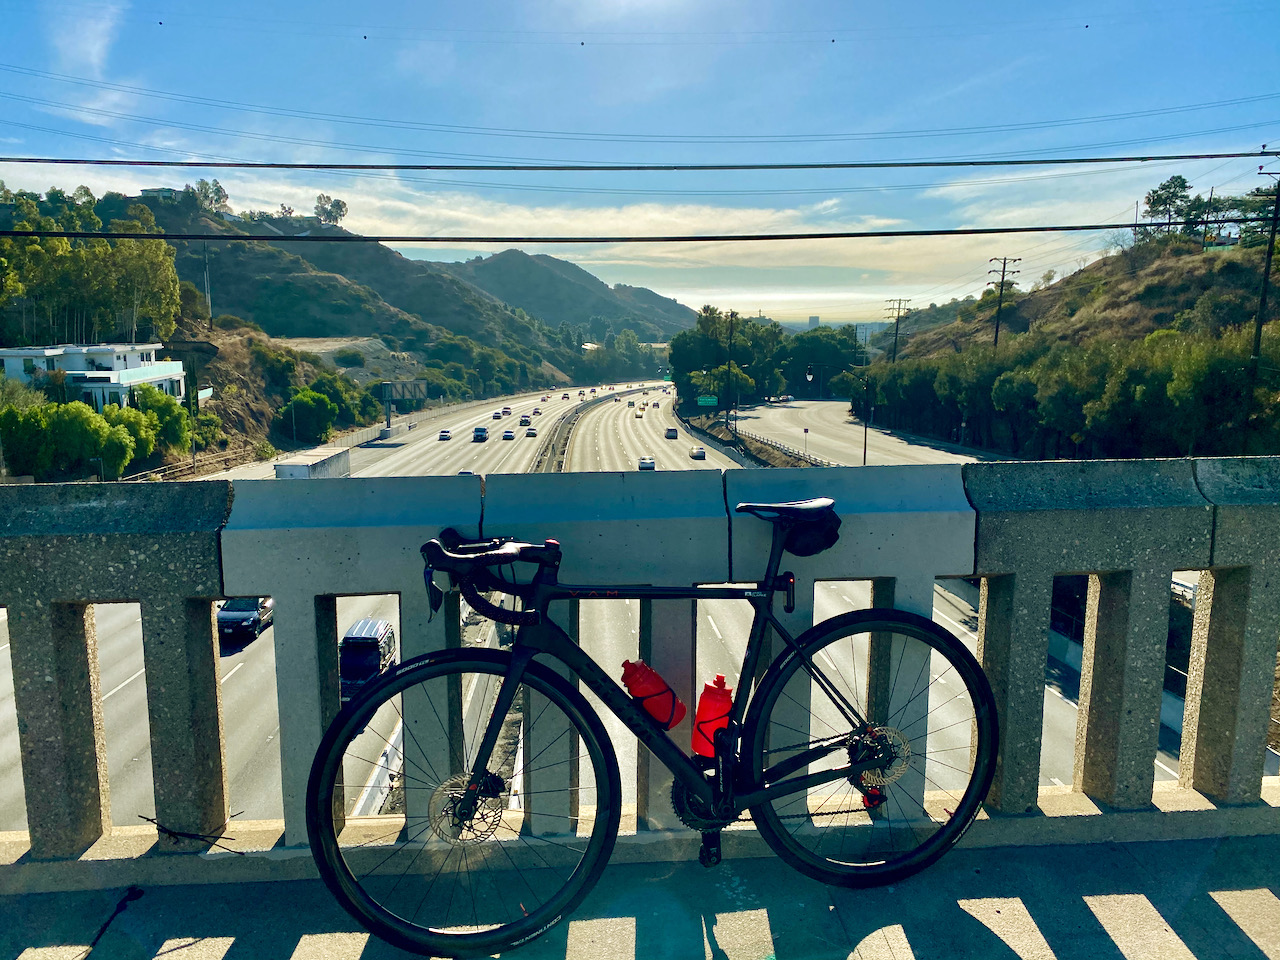 Bicycle on Mulholland overpass over the 101 freeway in Los Angeles, California